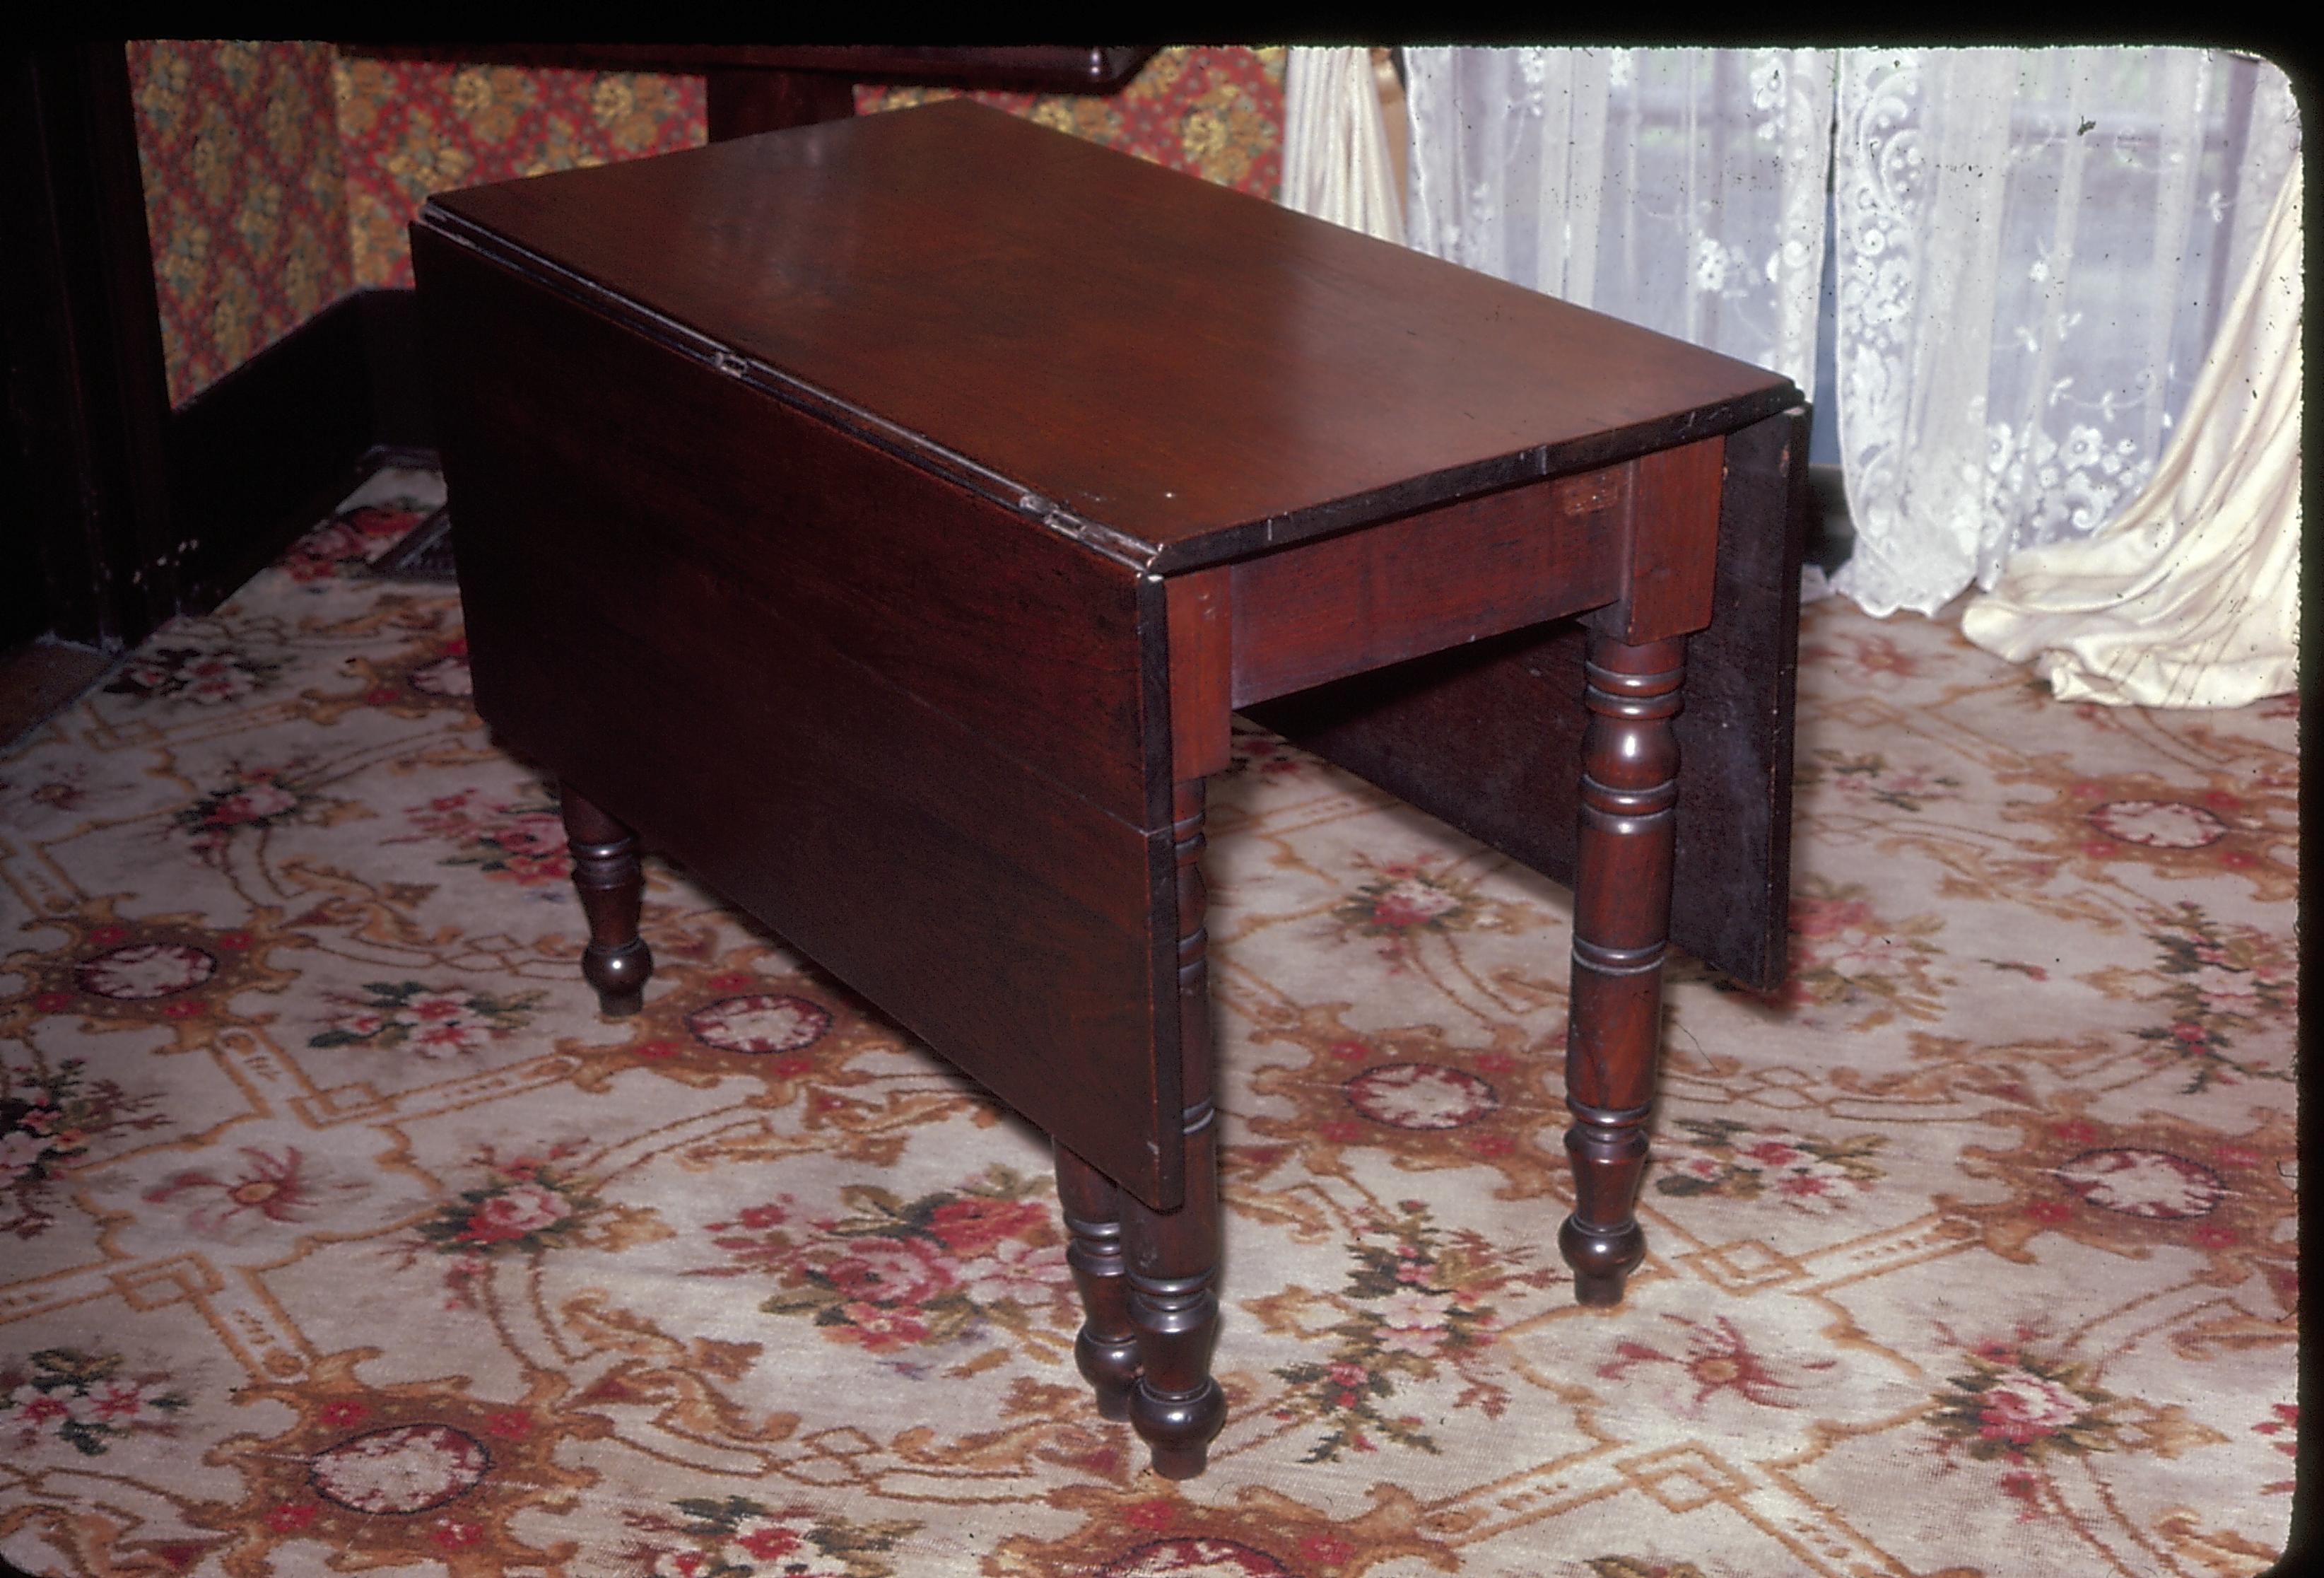 NA 2D.1, A.L. orig. Lincoln, home, Dining Room, table